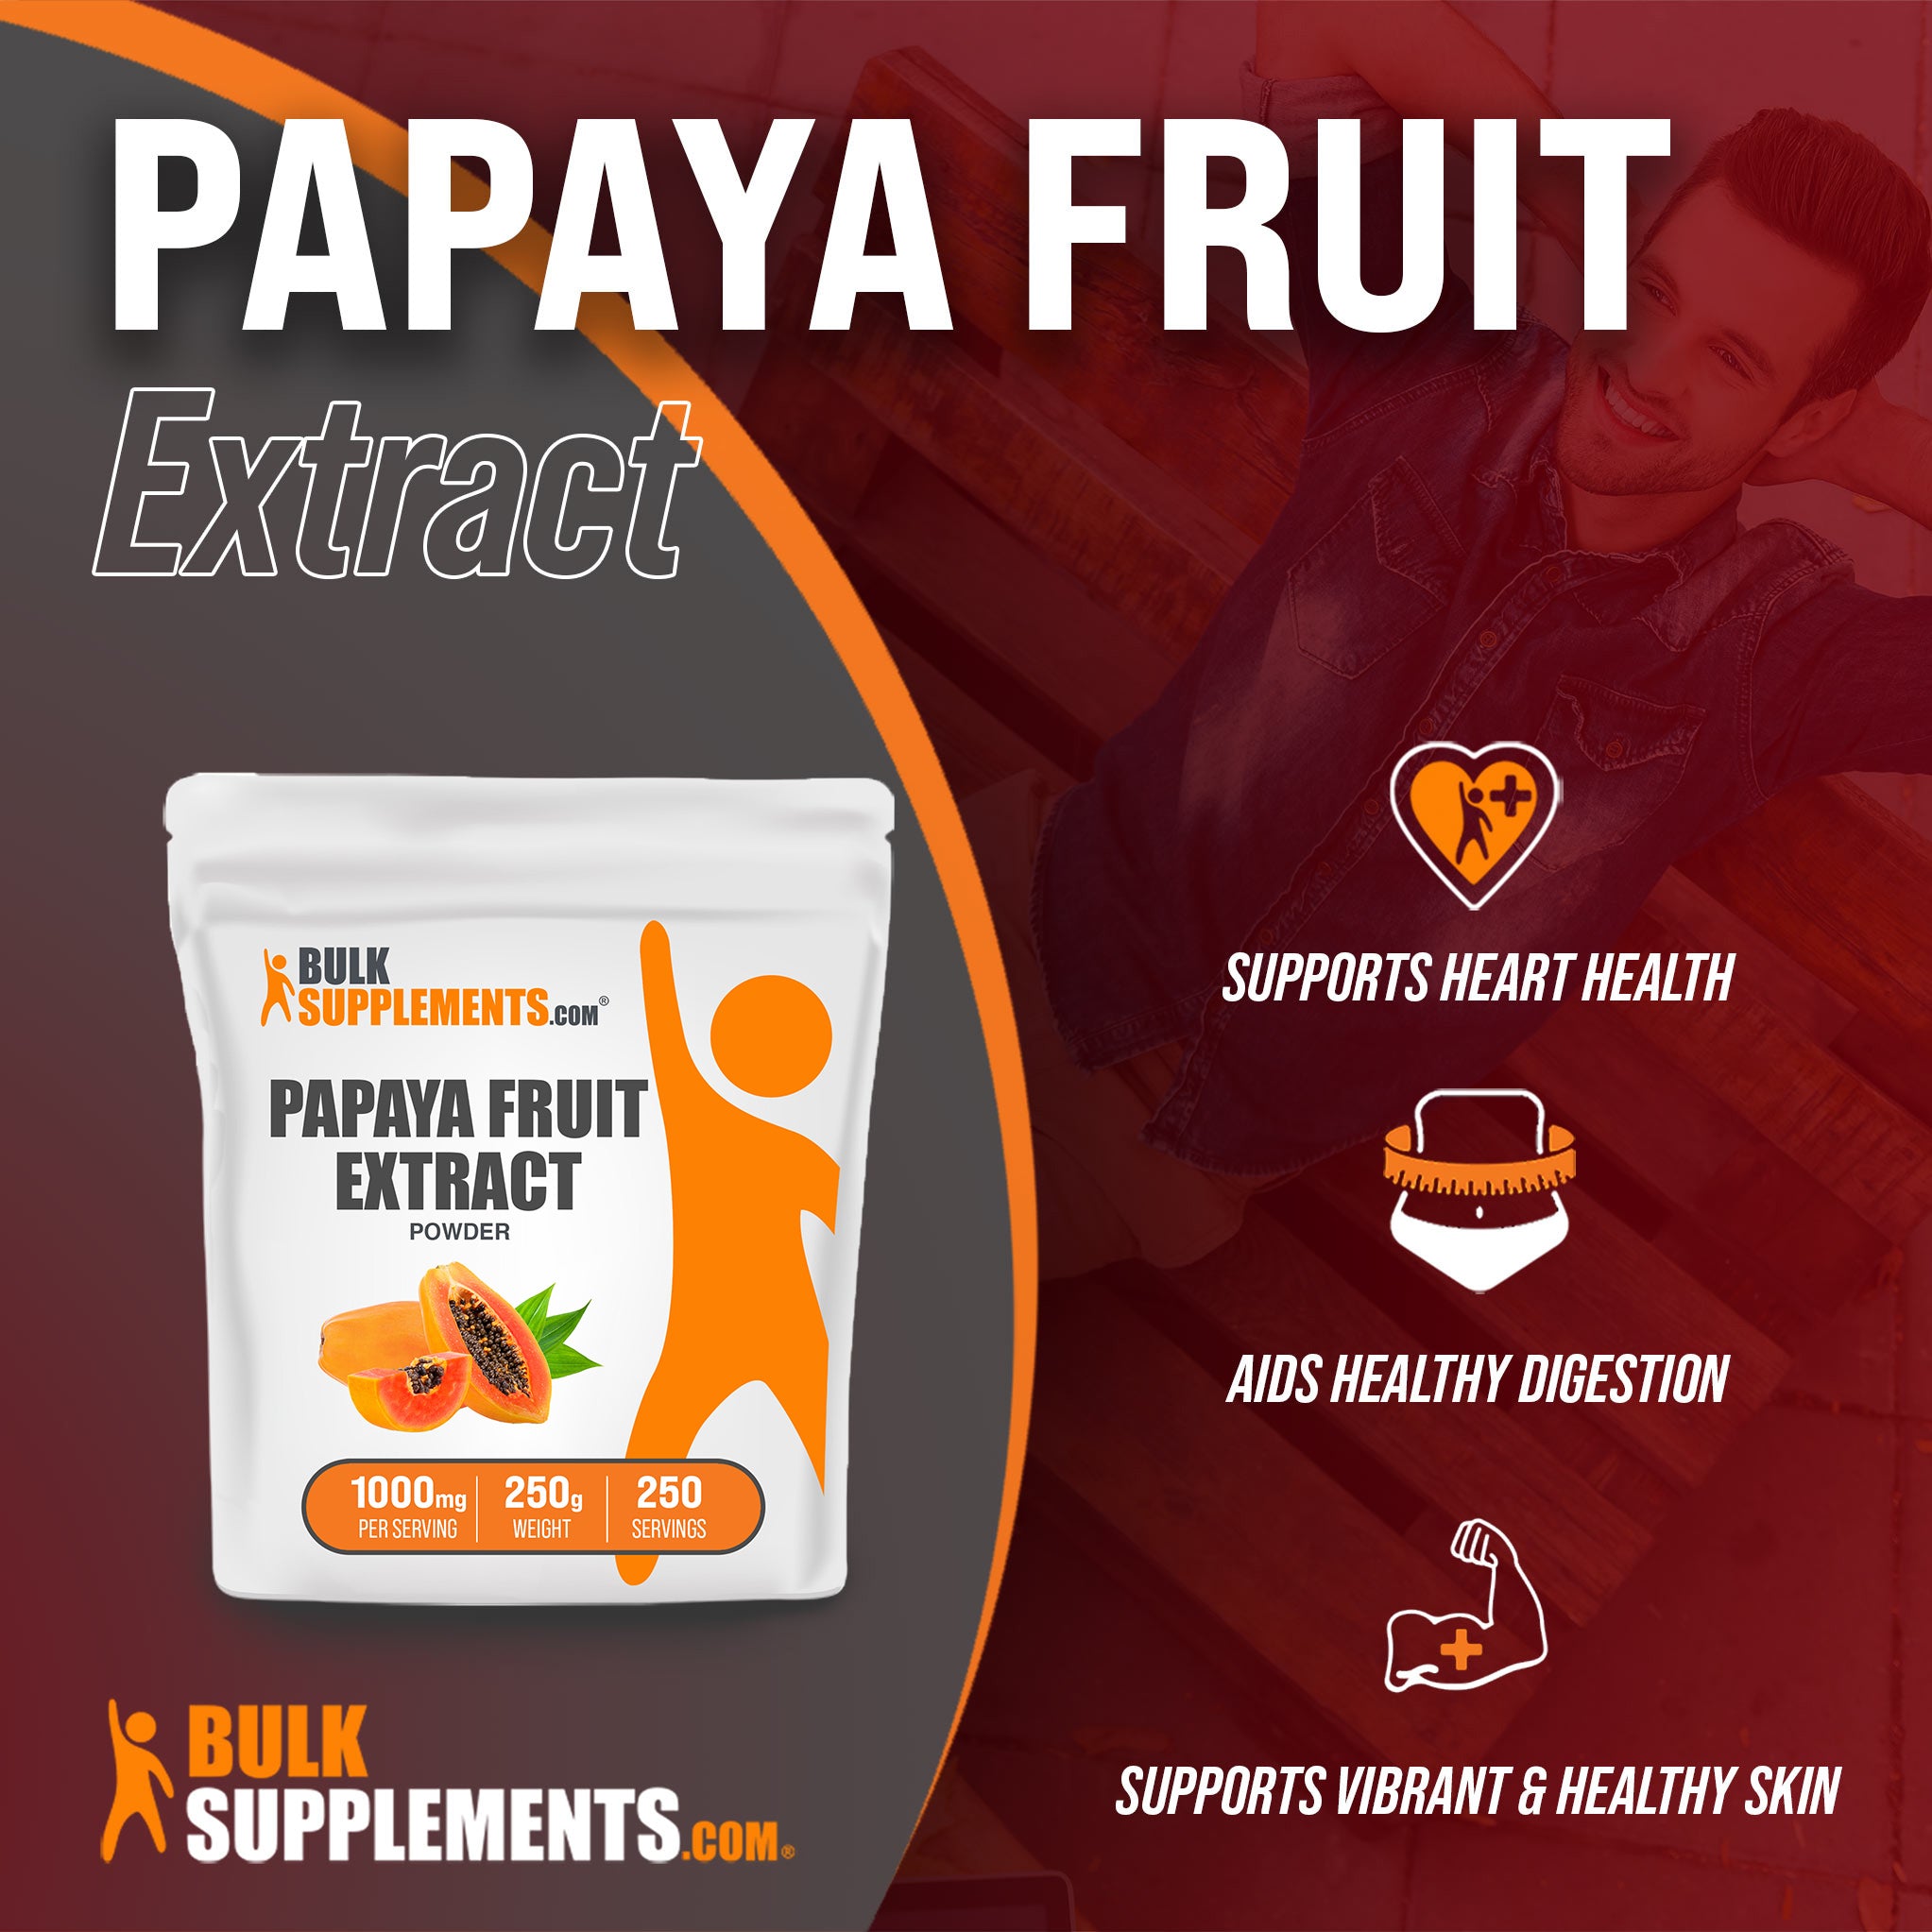 Benefits of Papaya Fruit Extract: supports heart health, aids healthy digestion, supports vibrant and healthy skin